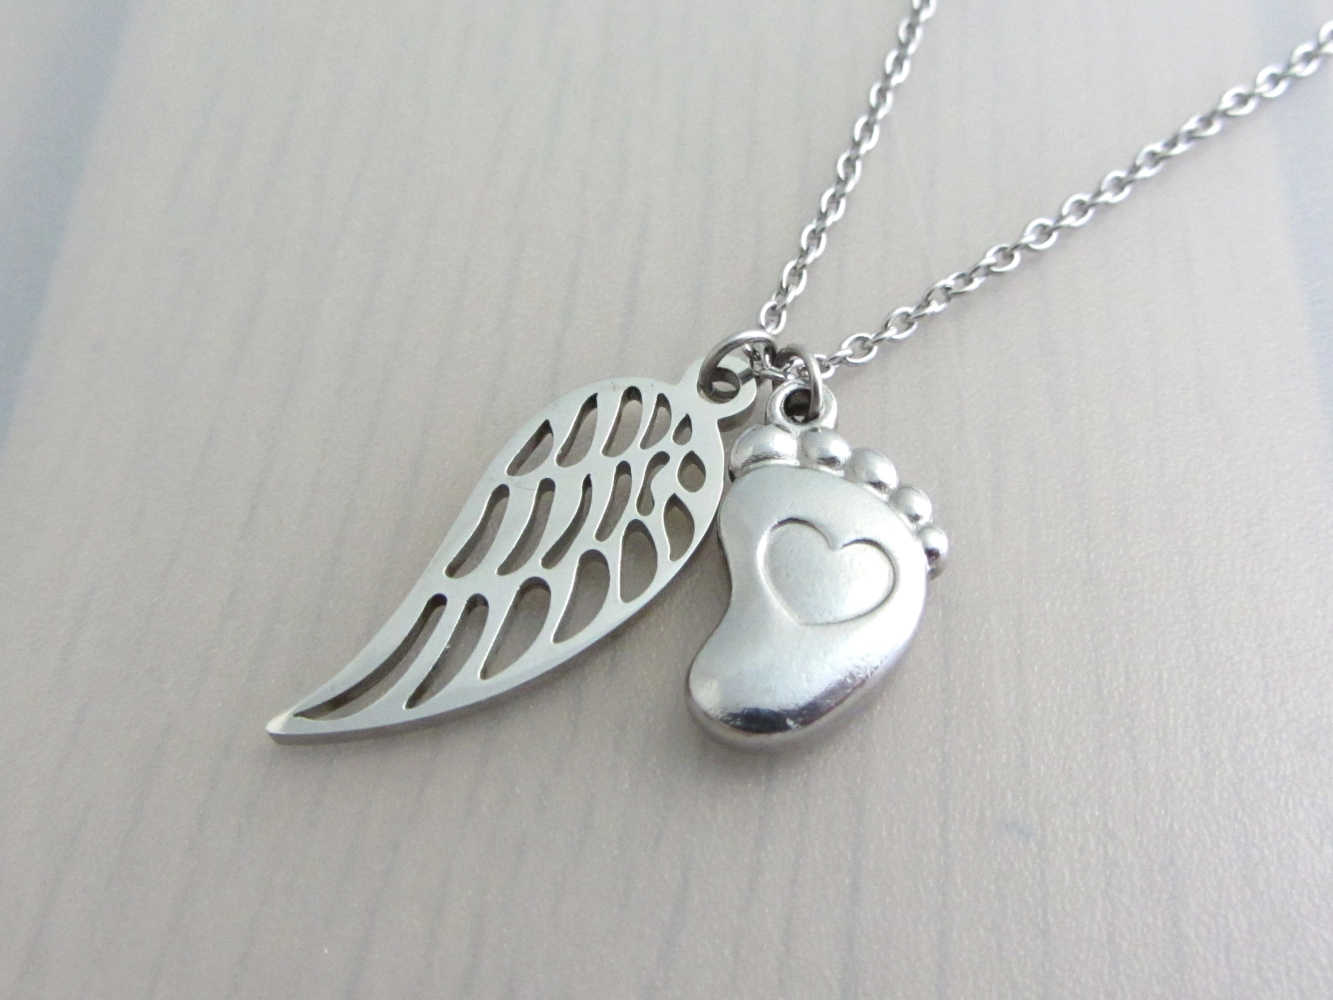 single angel wing charm and a single foot charm with indented heart on a stainless steel chain